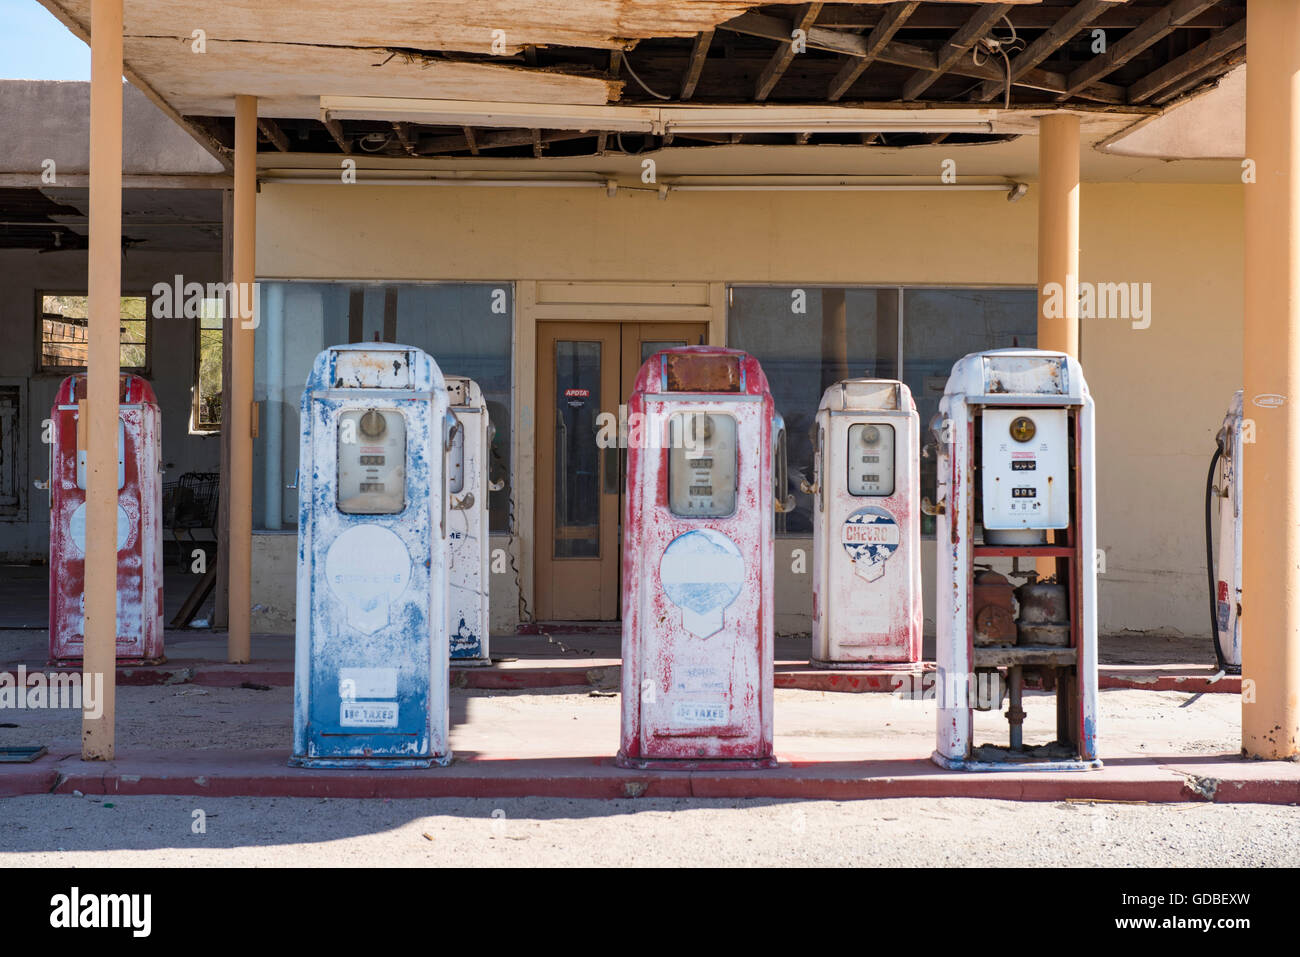 antique, disused gas pumps at ruins of gas station Stock Photo